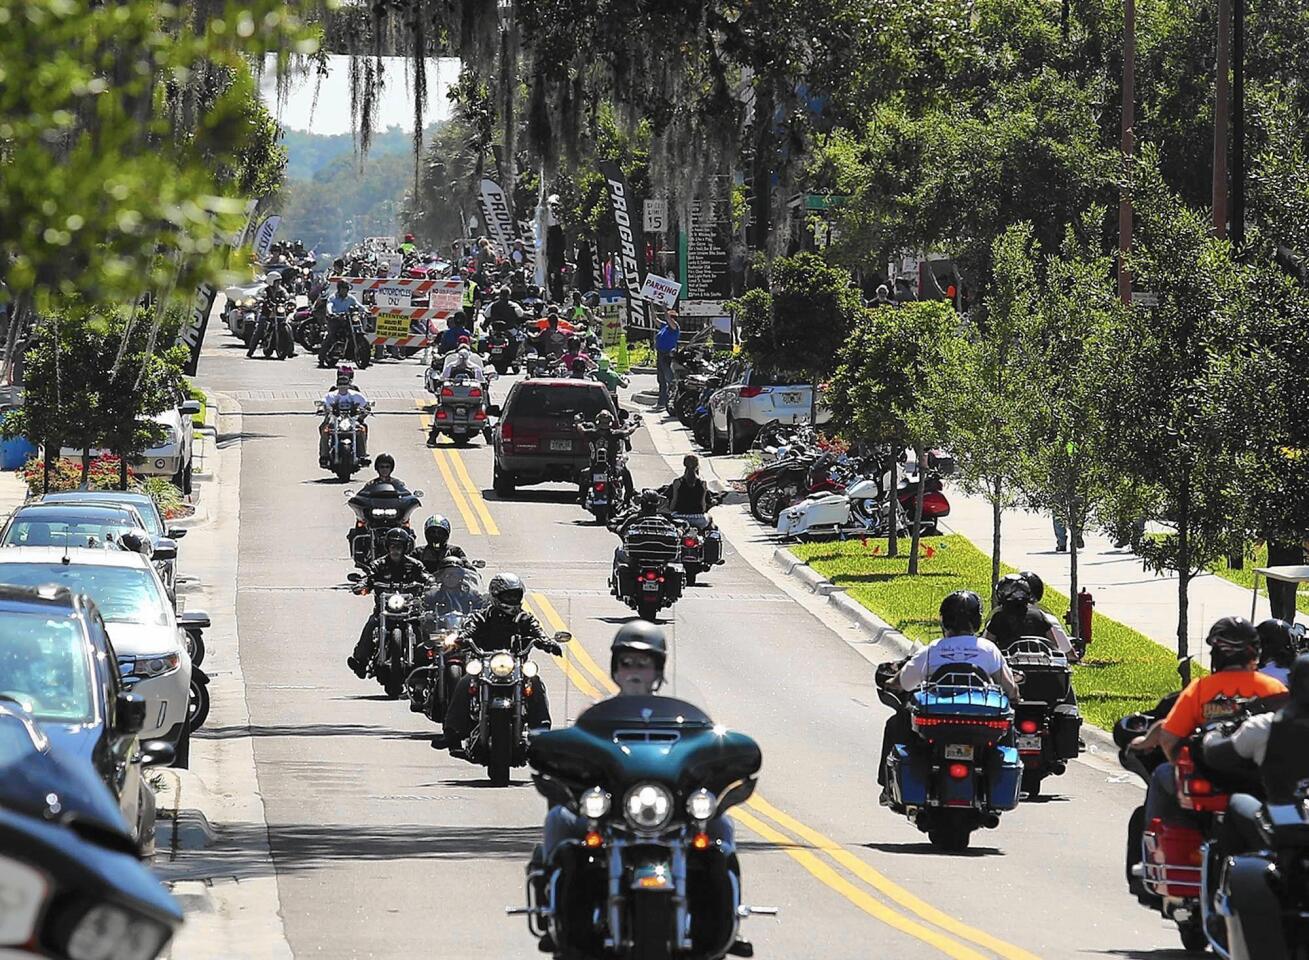 Motorcycles rumble down Main Street in Leesburg on the final day of the Leesburg Bikefest on Sunday, April 23, 2016. (Stephen M. Dowell/Orlando Sentinel)